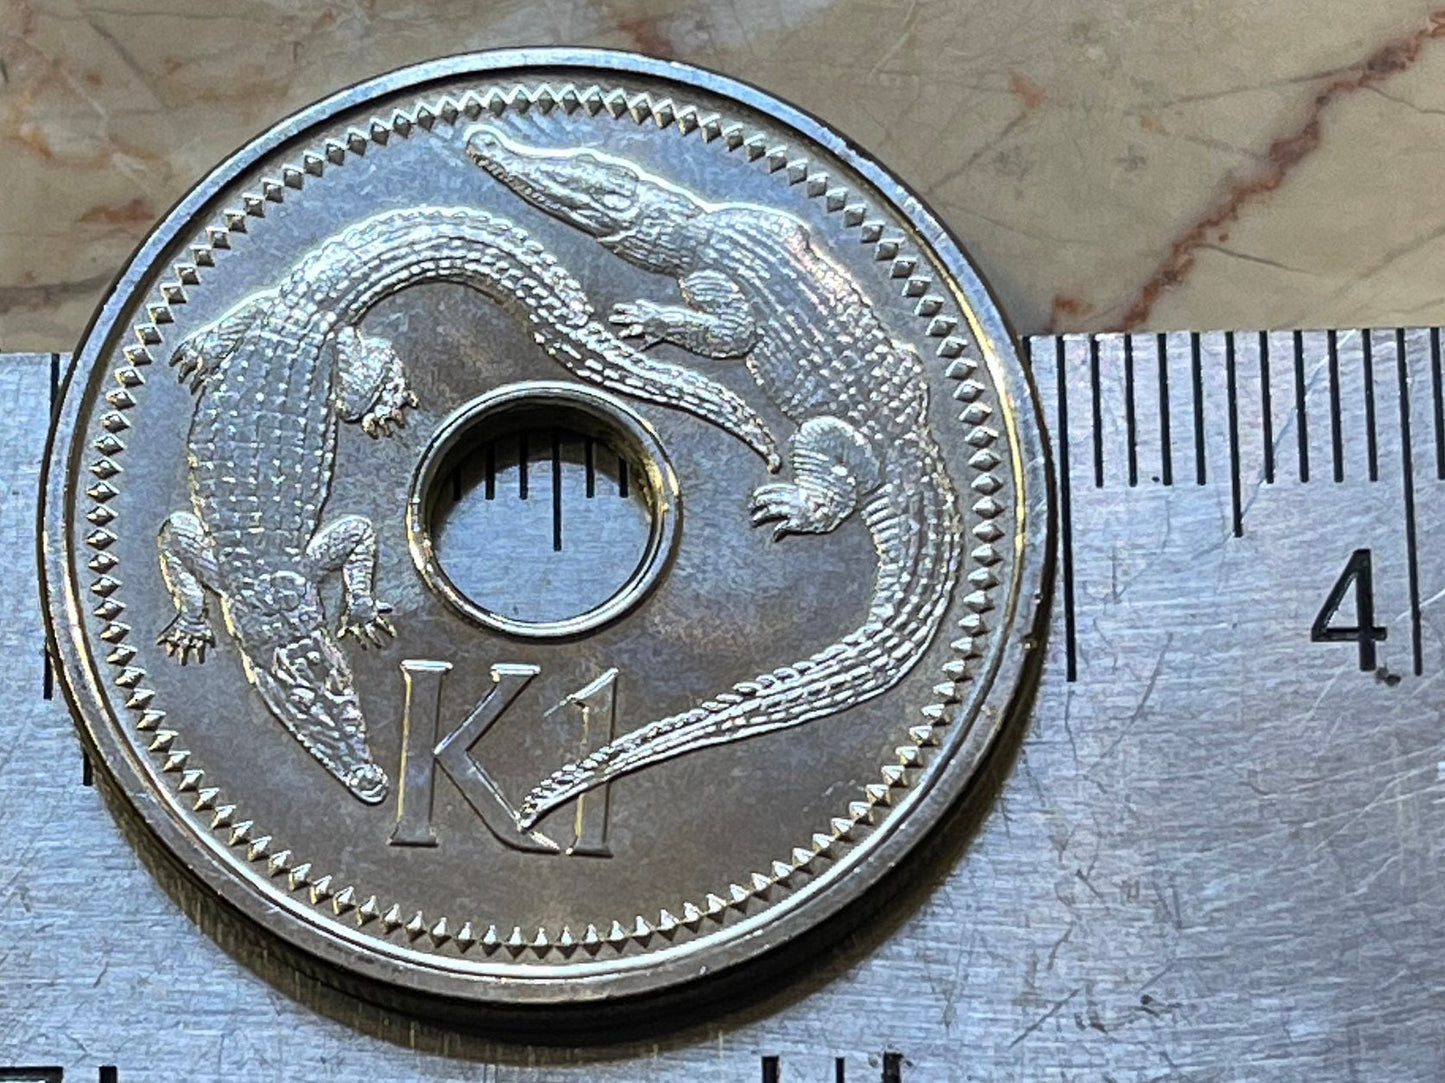 New Guinea Crocodiles 1 Kina Papua New Guinea Authentic Coin Money for Jewelry and Craft Making